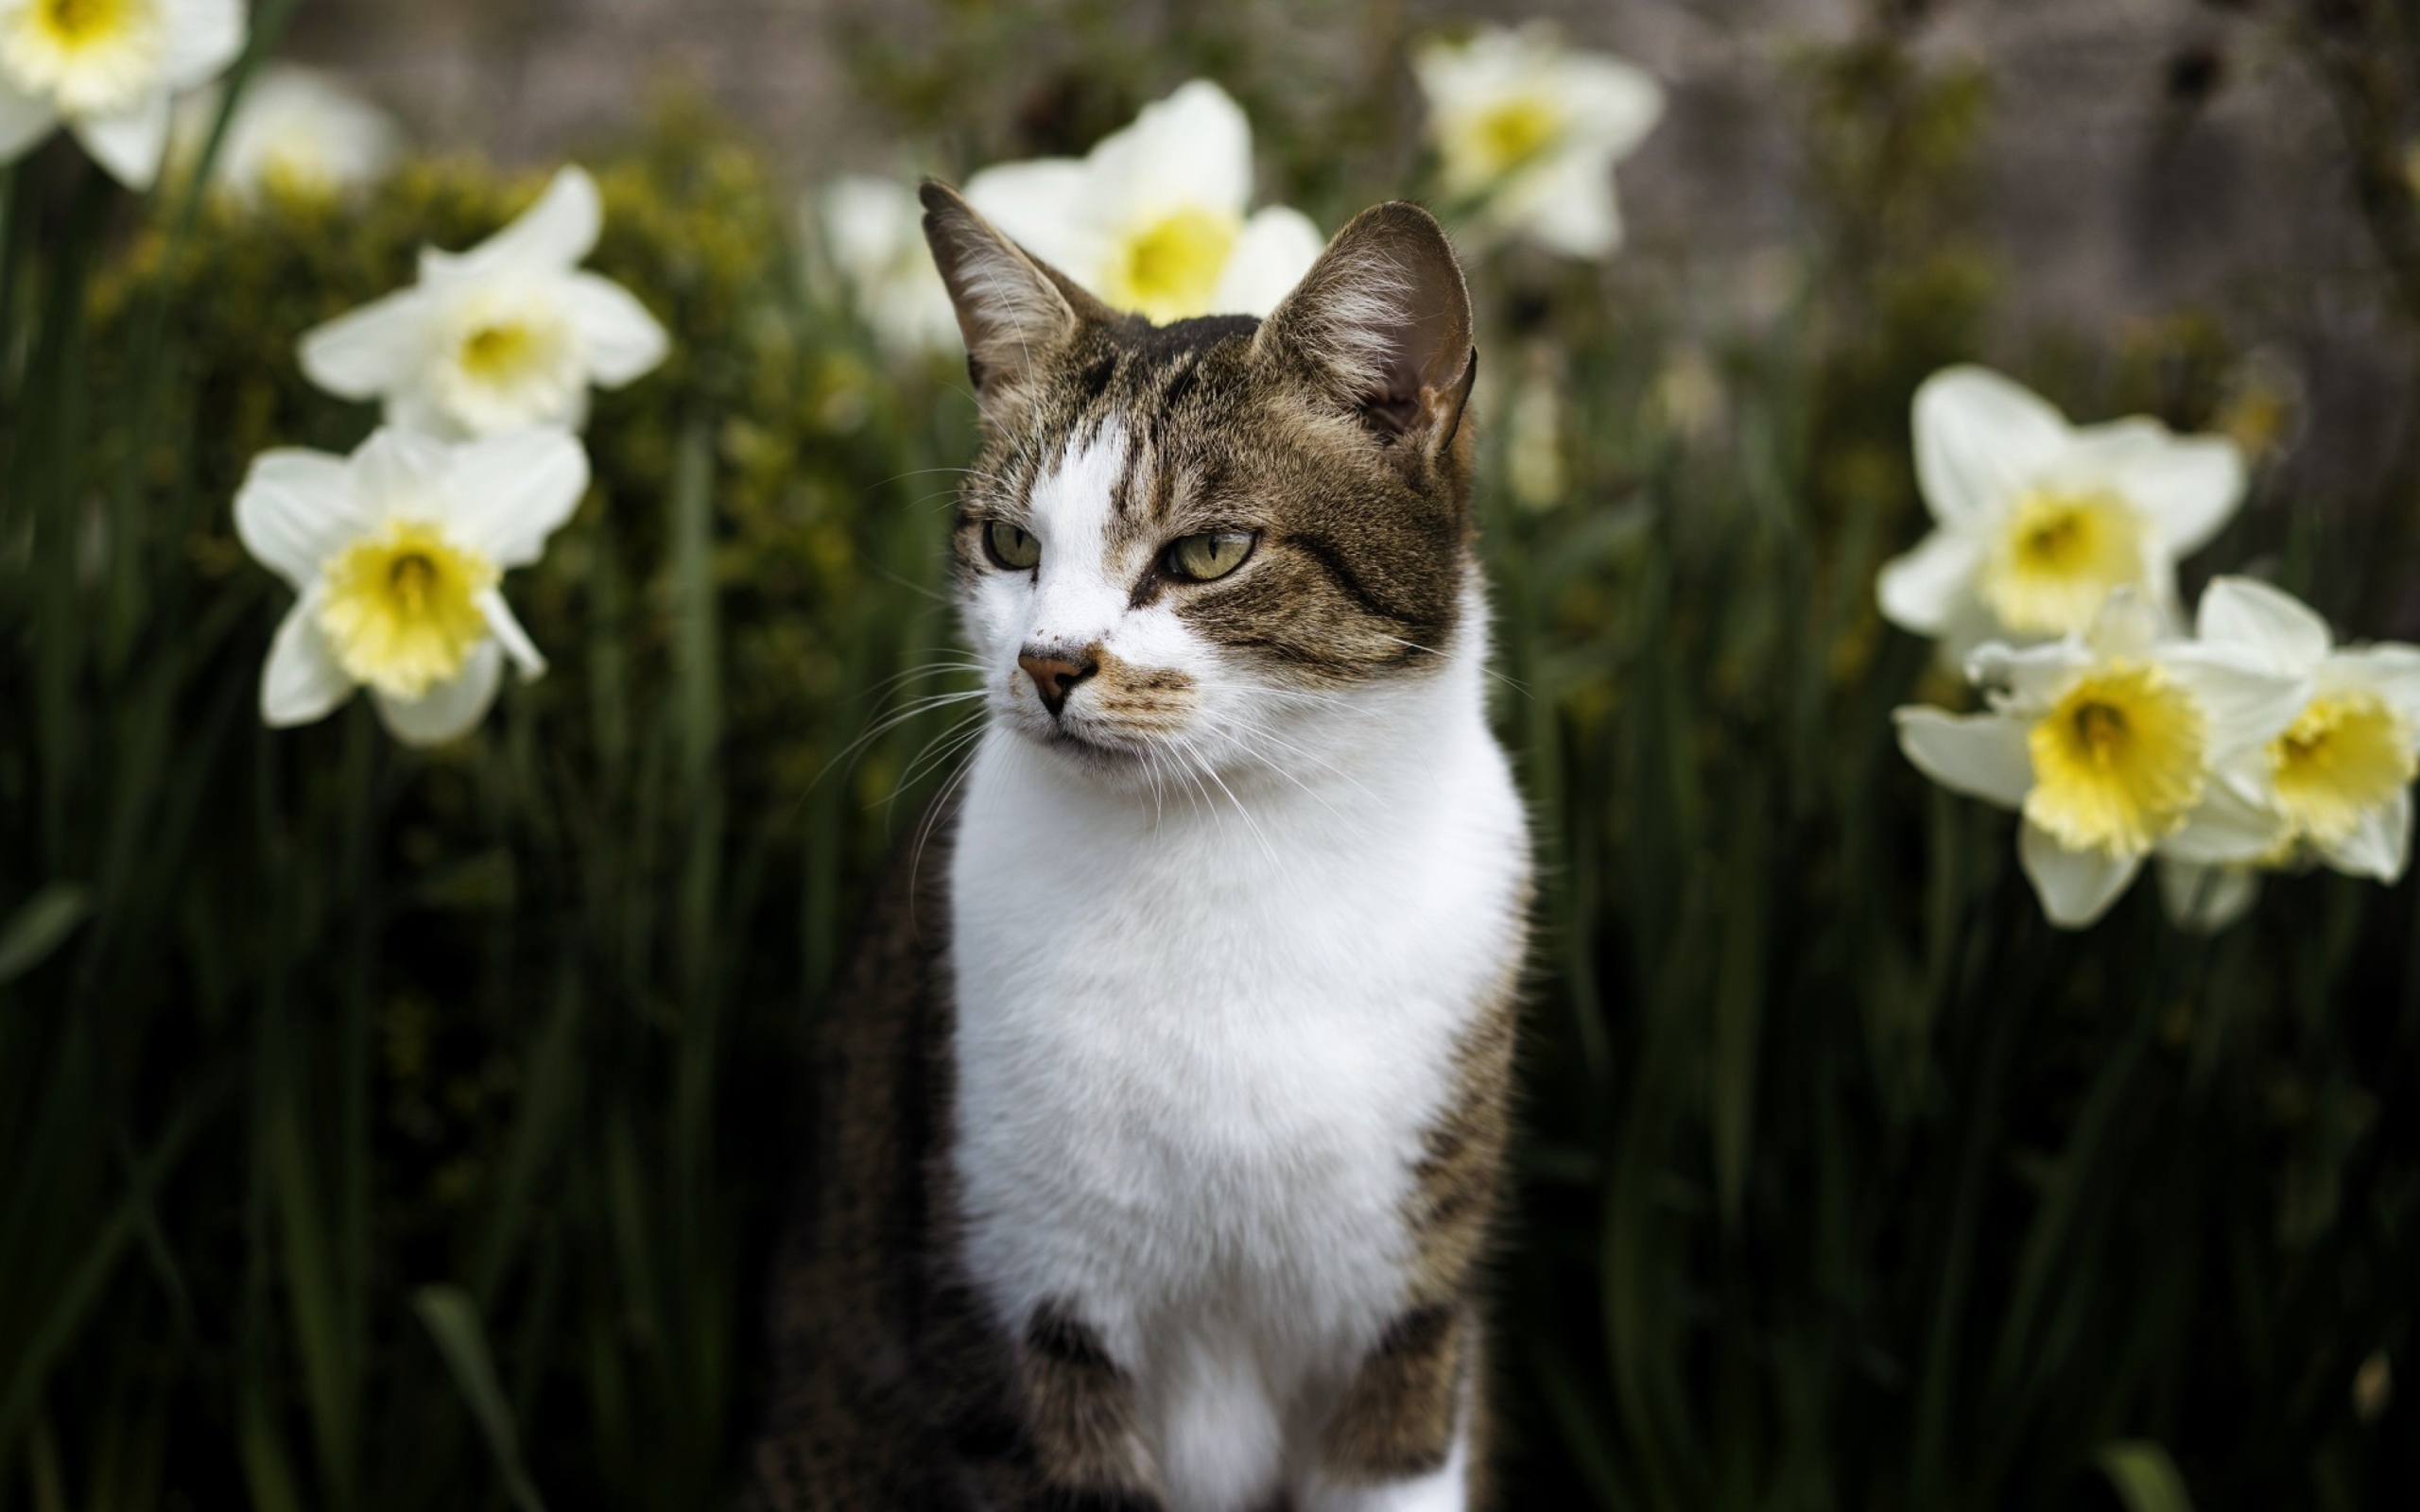 The cat sits in white narcissus colors